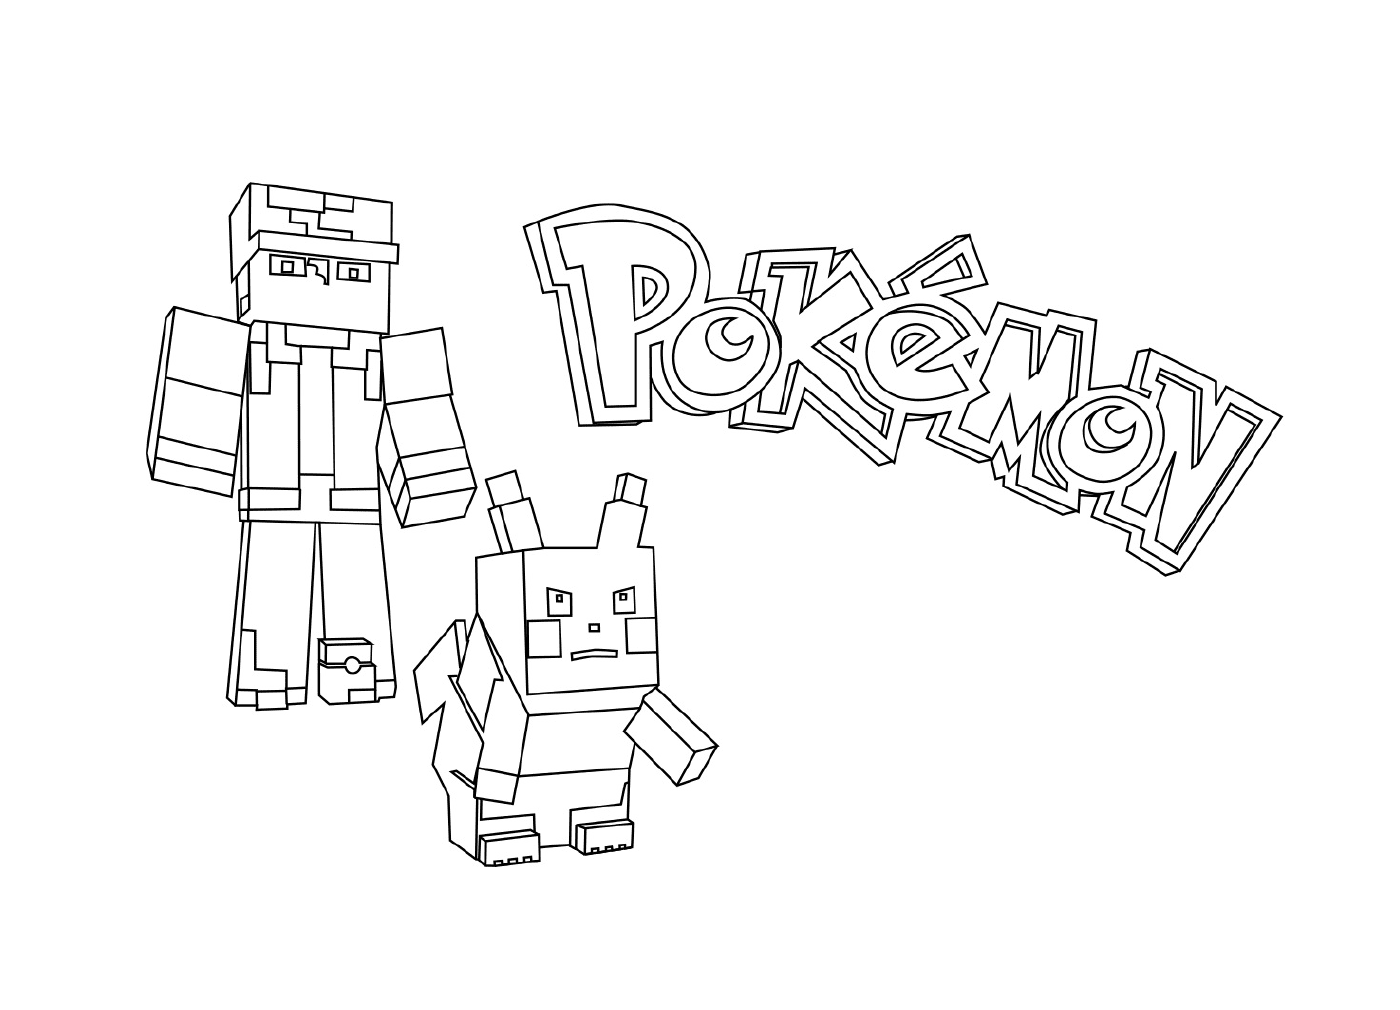  Pikachu and Minecraft character 